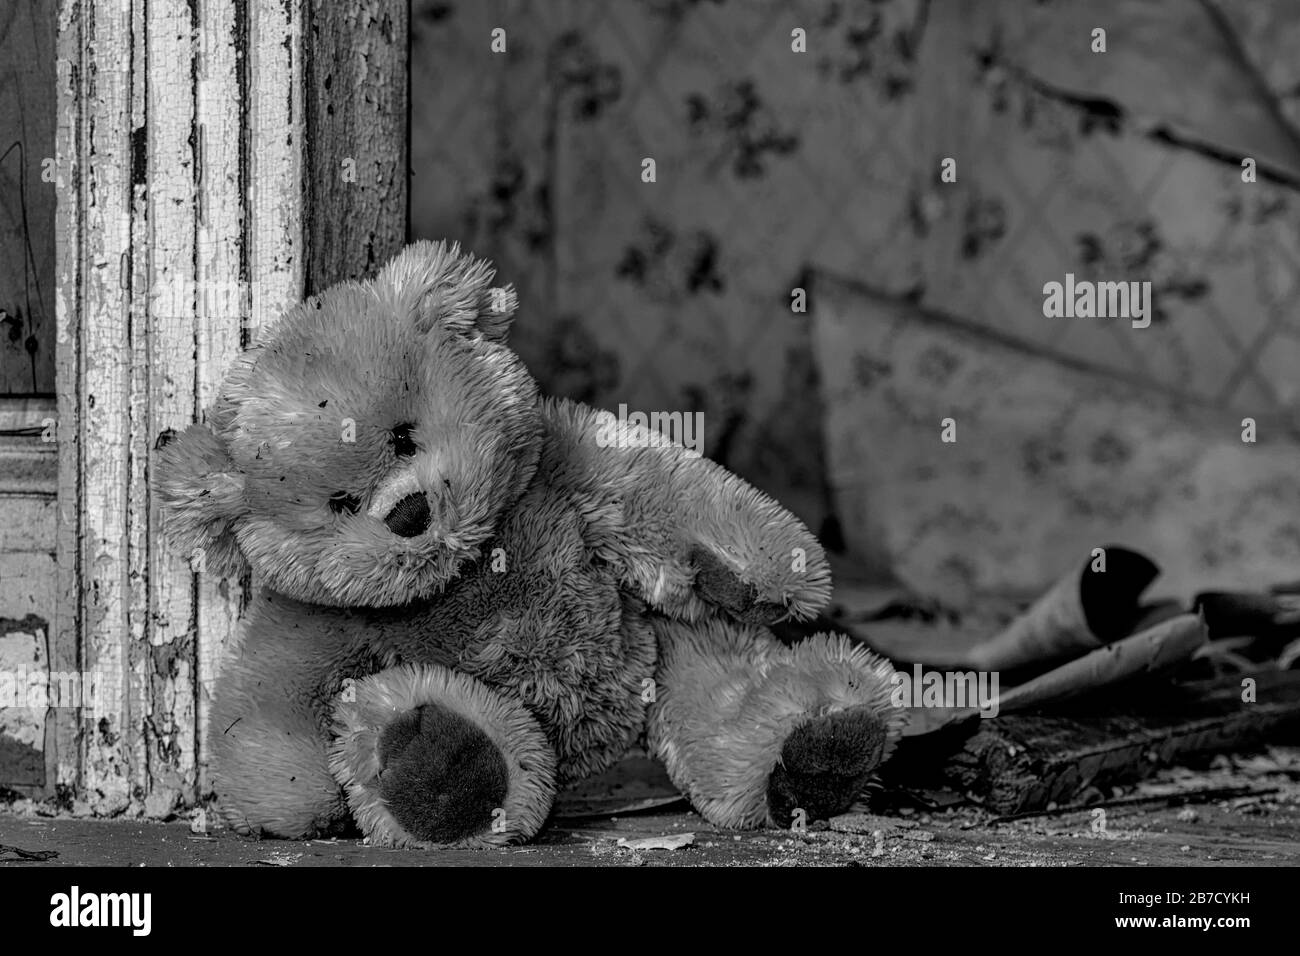 A dirty teddy bear leaning against a door frame in an old, abandoned house. Debris and assorted wallpaper peeling from the wall in the background. B&W Stock Photo